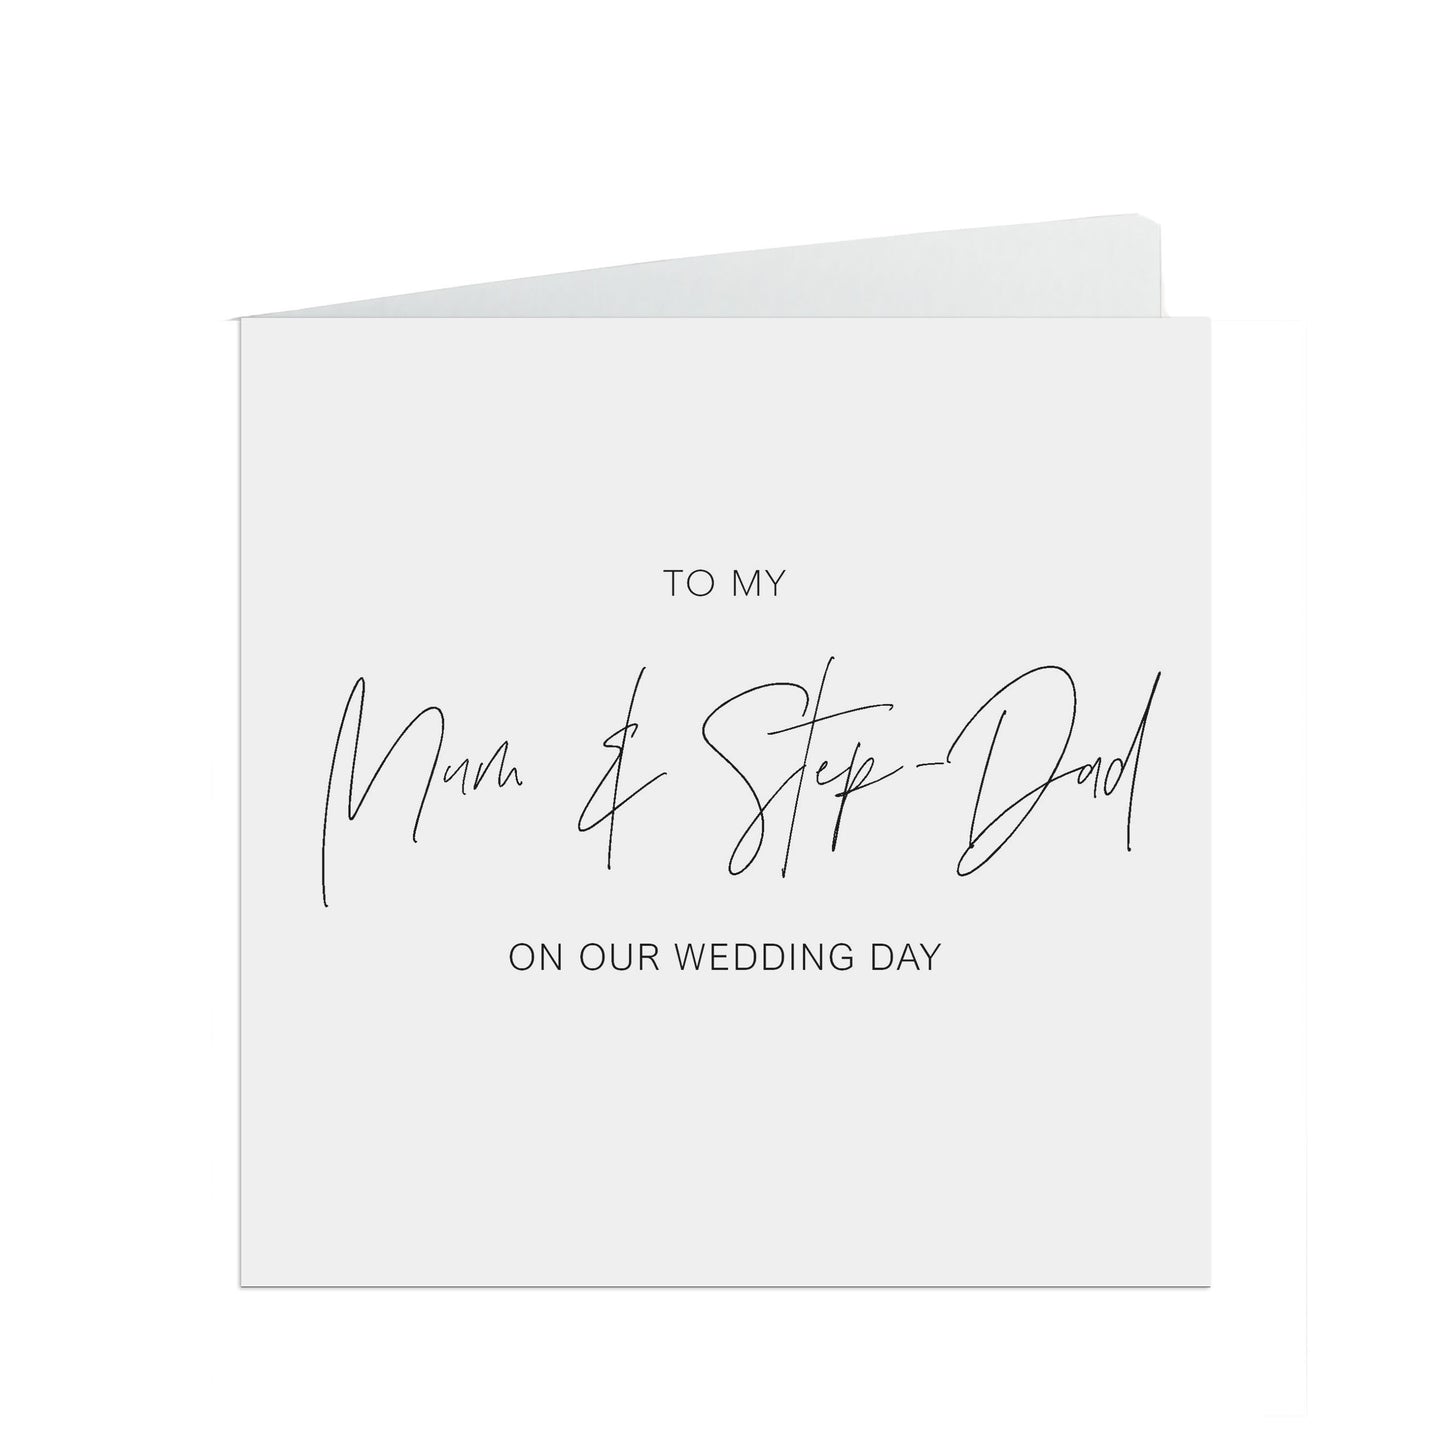 Mum And Step Dad On Our Wedding day card, Elegant Black & White Design,6x6 Inches In Size With A White Envelope